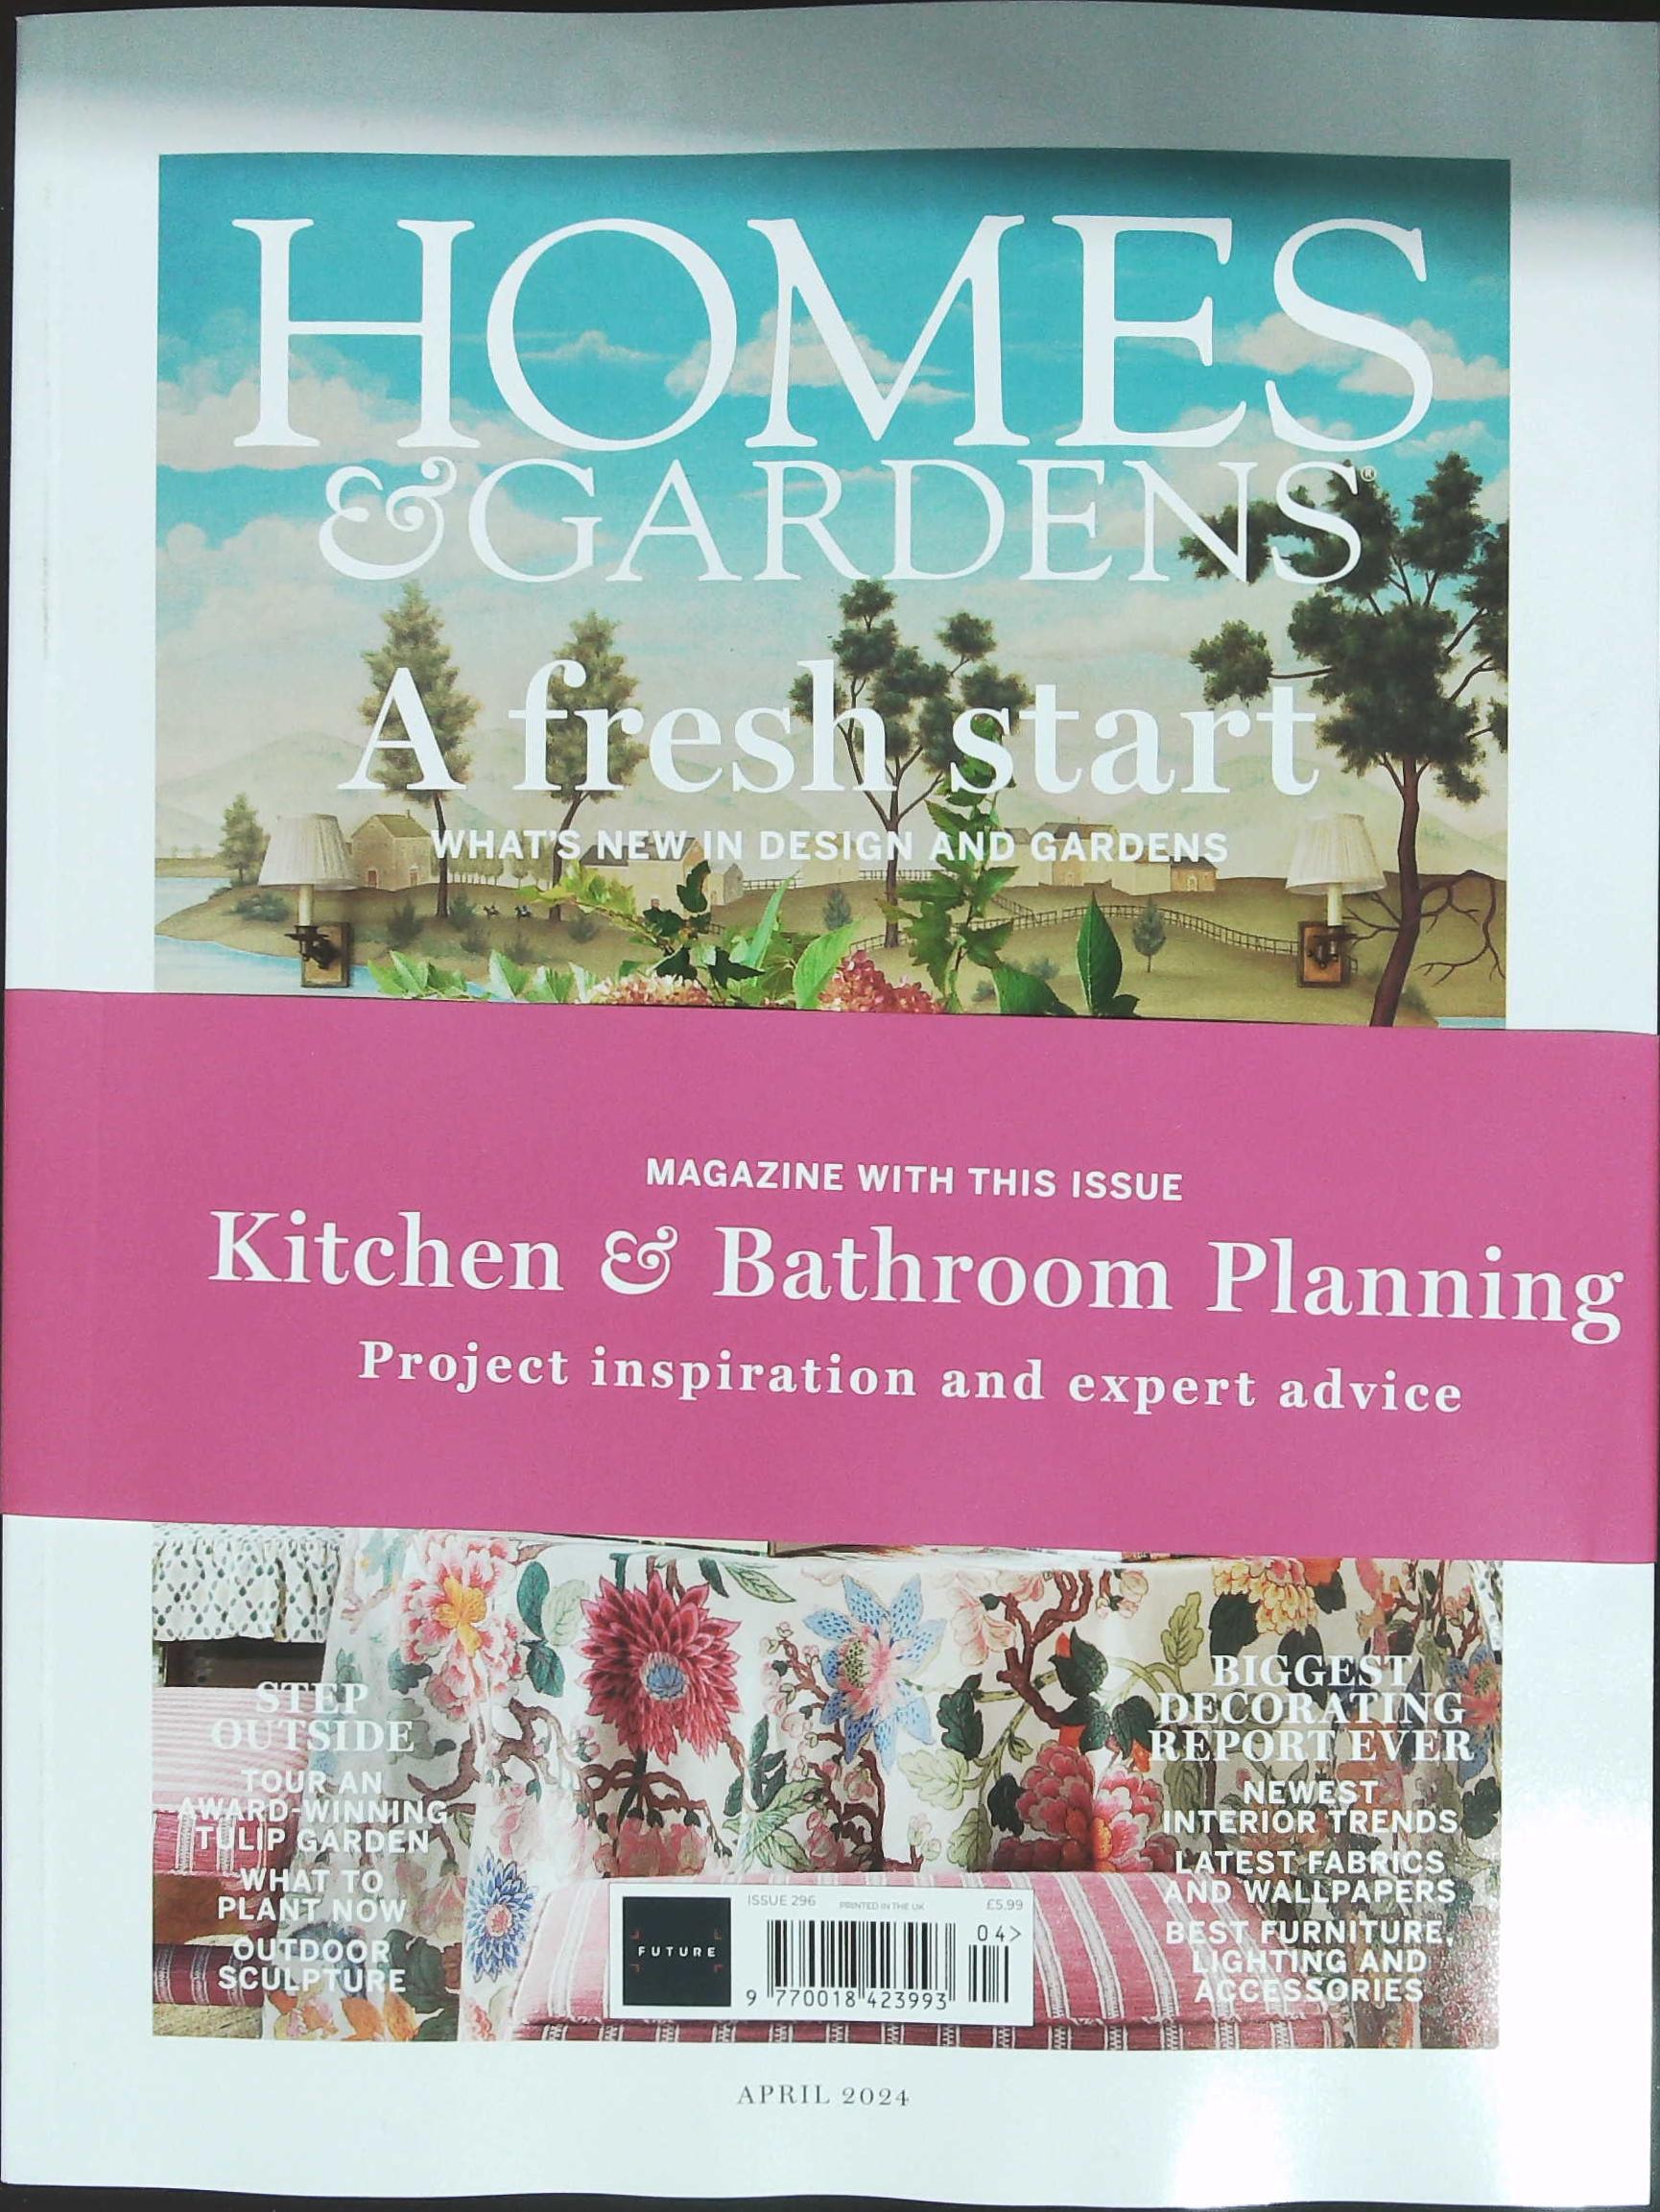 HOMES AND GARDENS